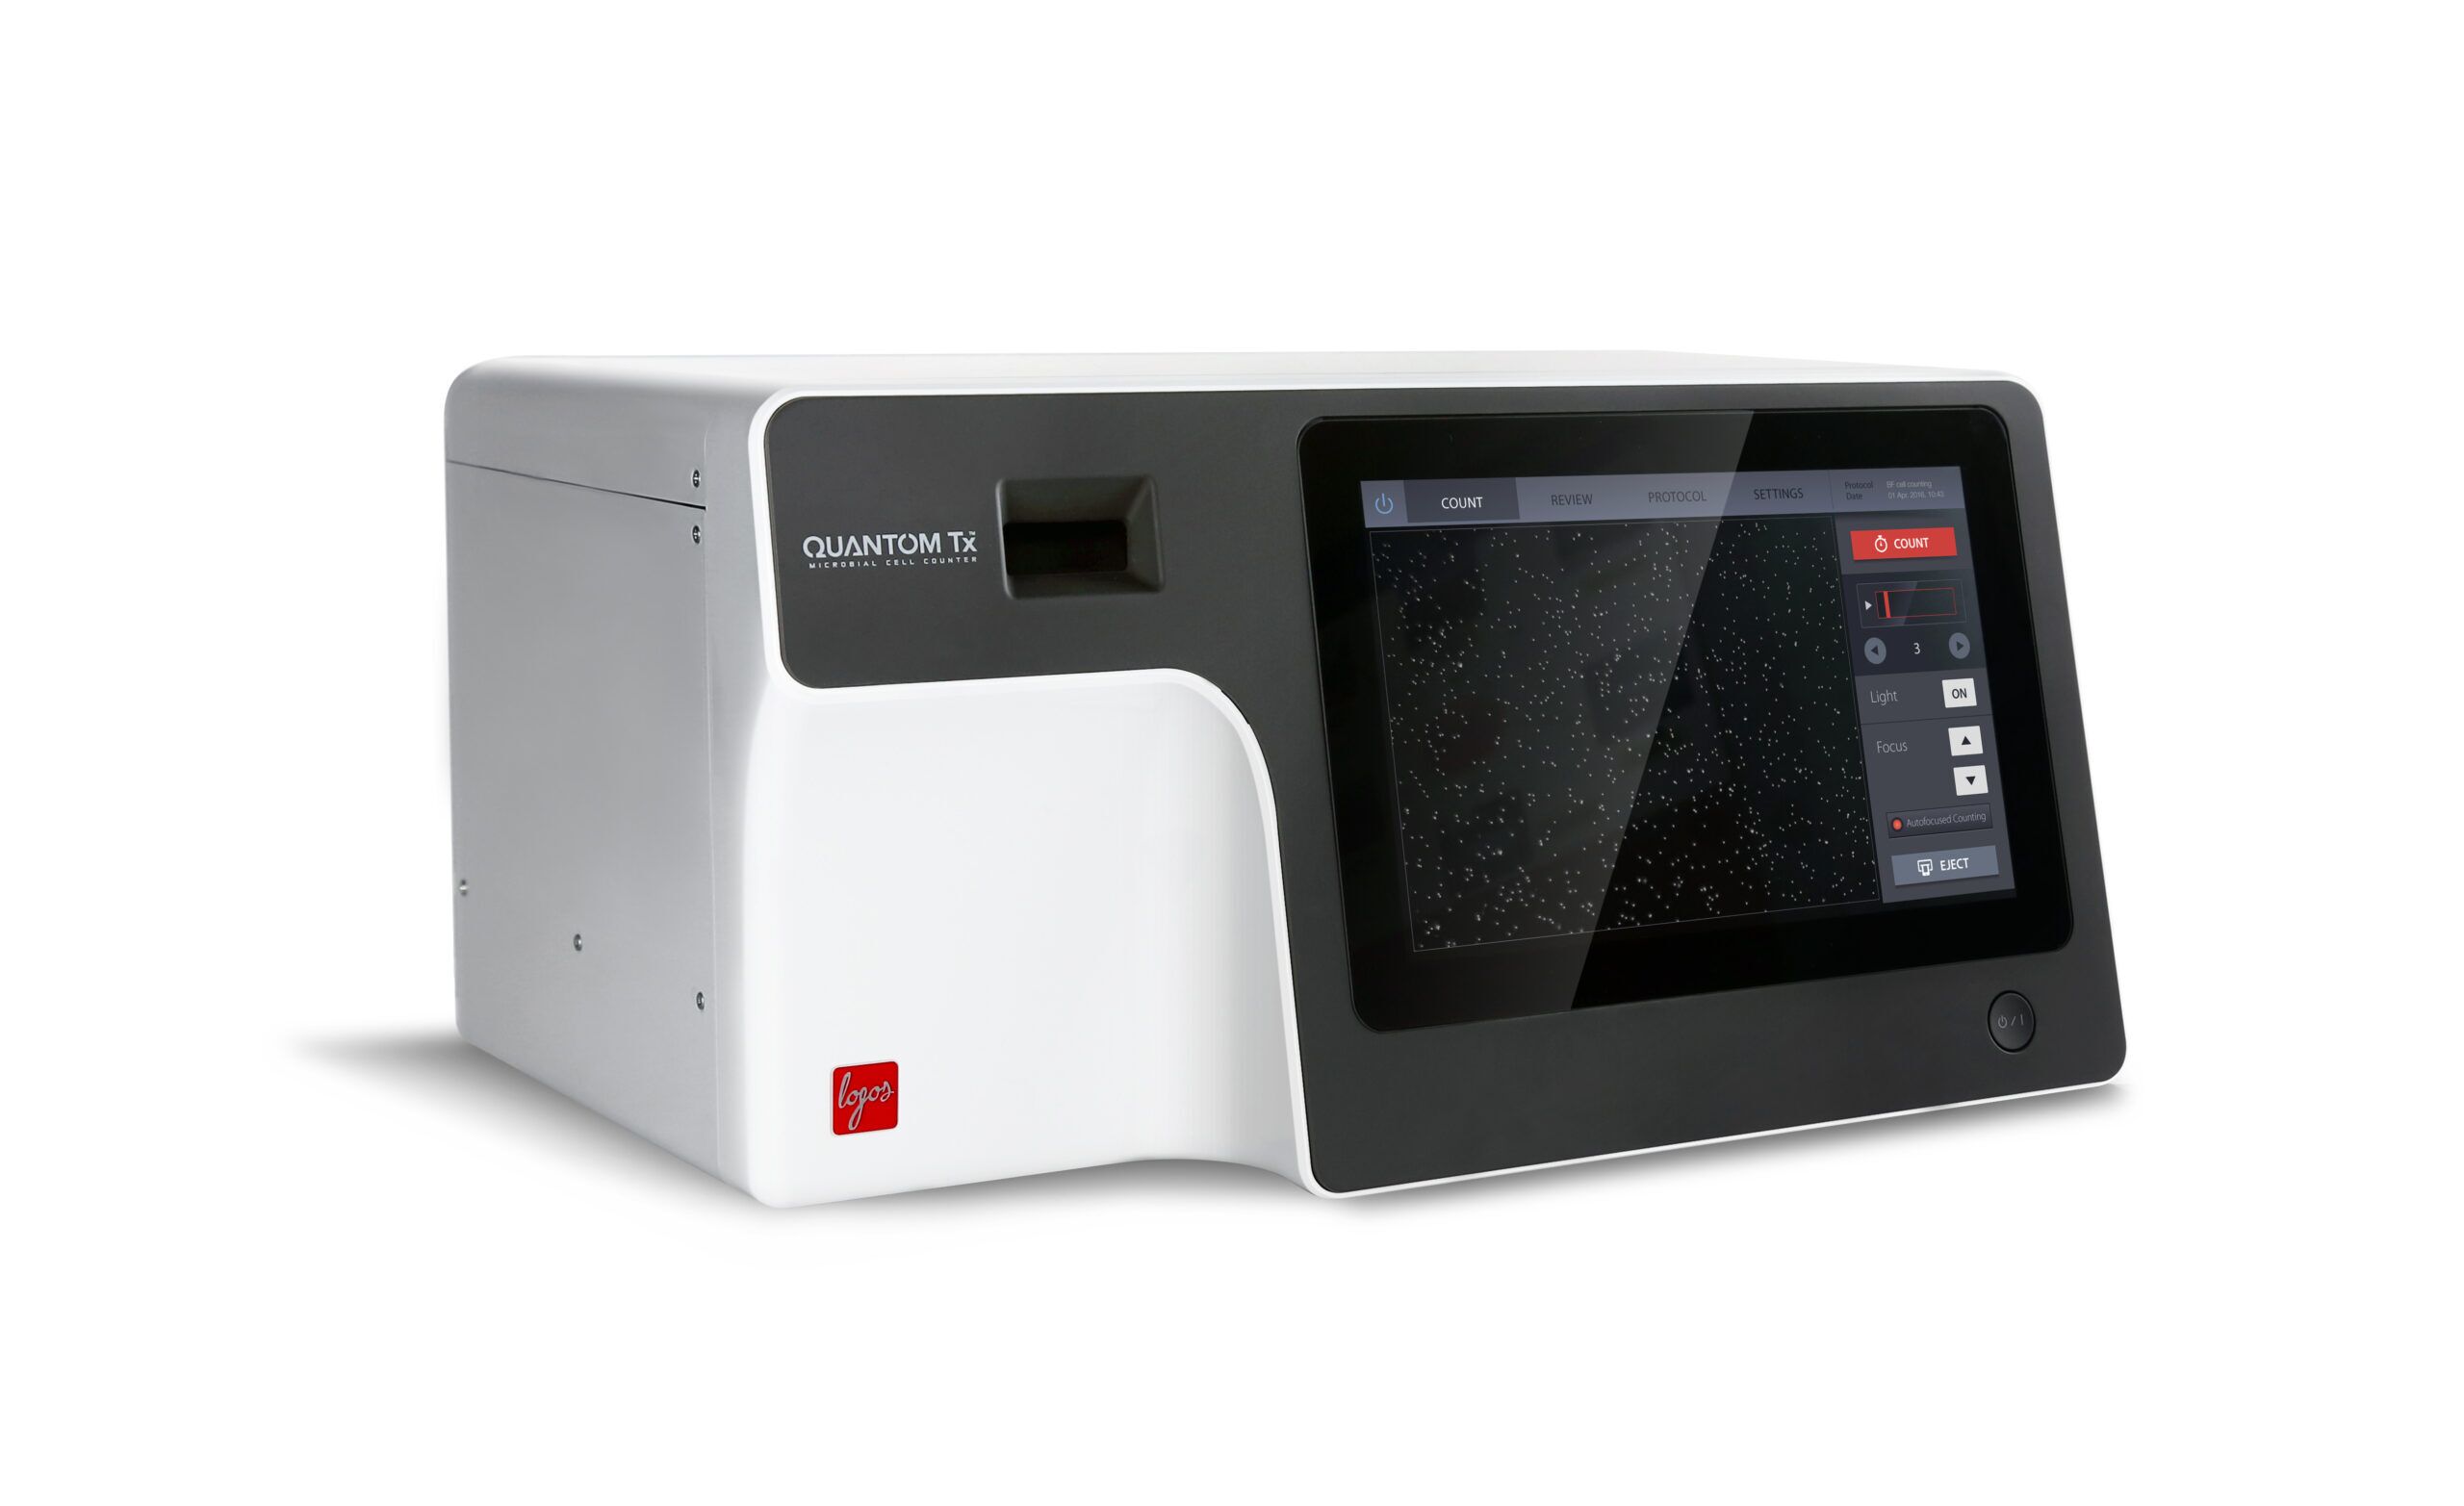 QUANTOM Tx Microbial Cell Counter